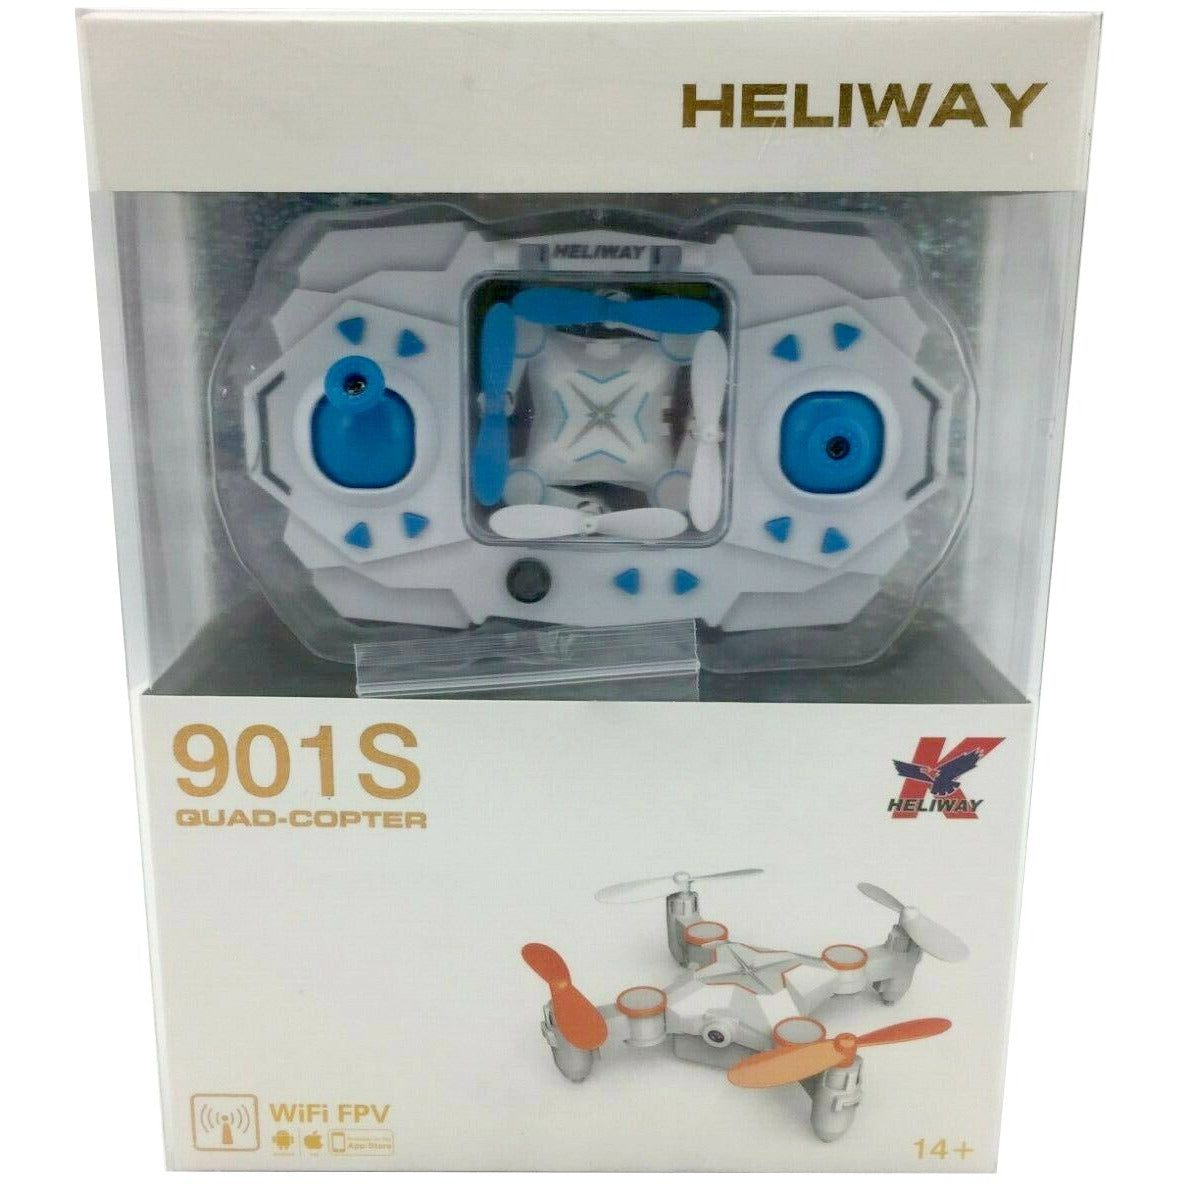 Heliway Quad Copter Drone / 901S / Foldable / WiFi Controlled / White / Blue